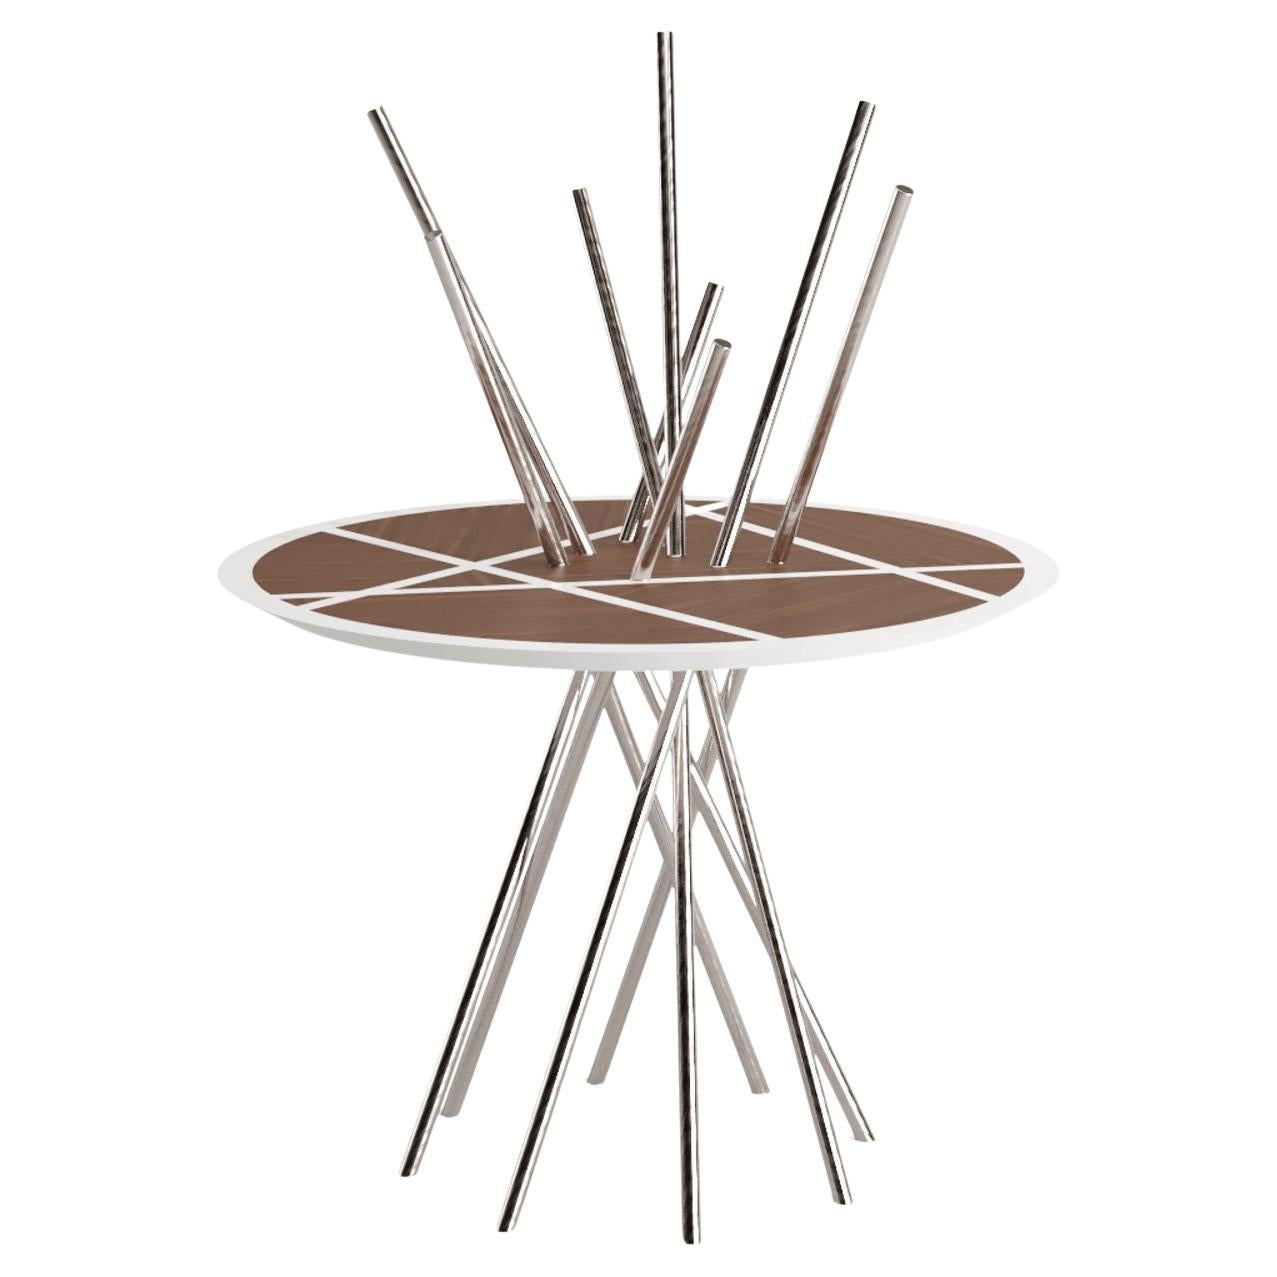 21st Century Modern Entryway Round Pedestal Table in Walnut and Stainless Steel